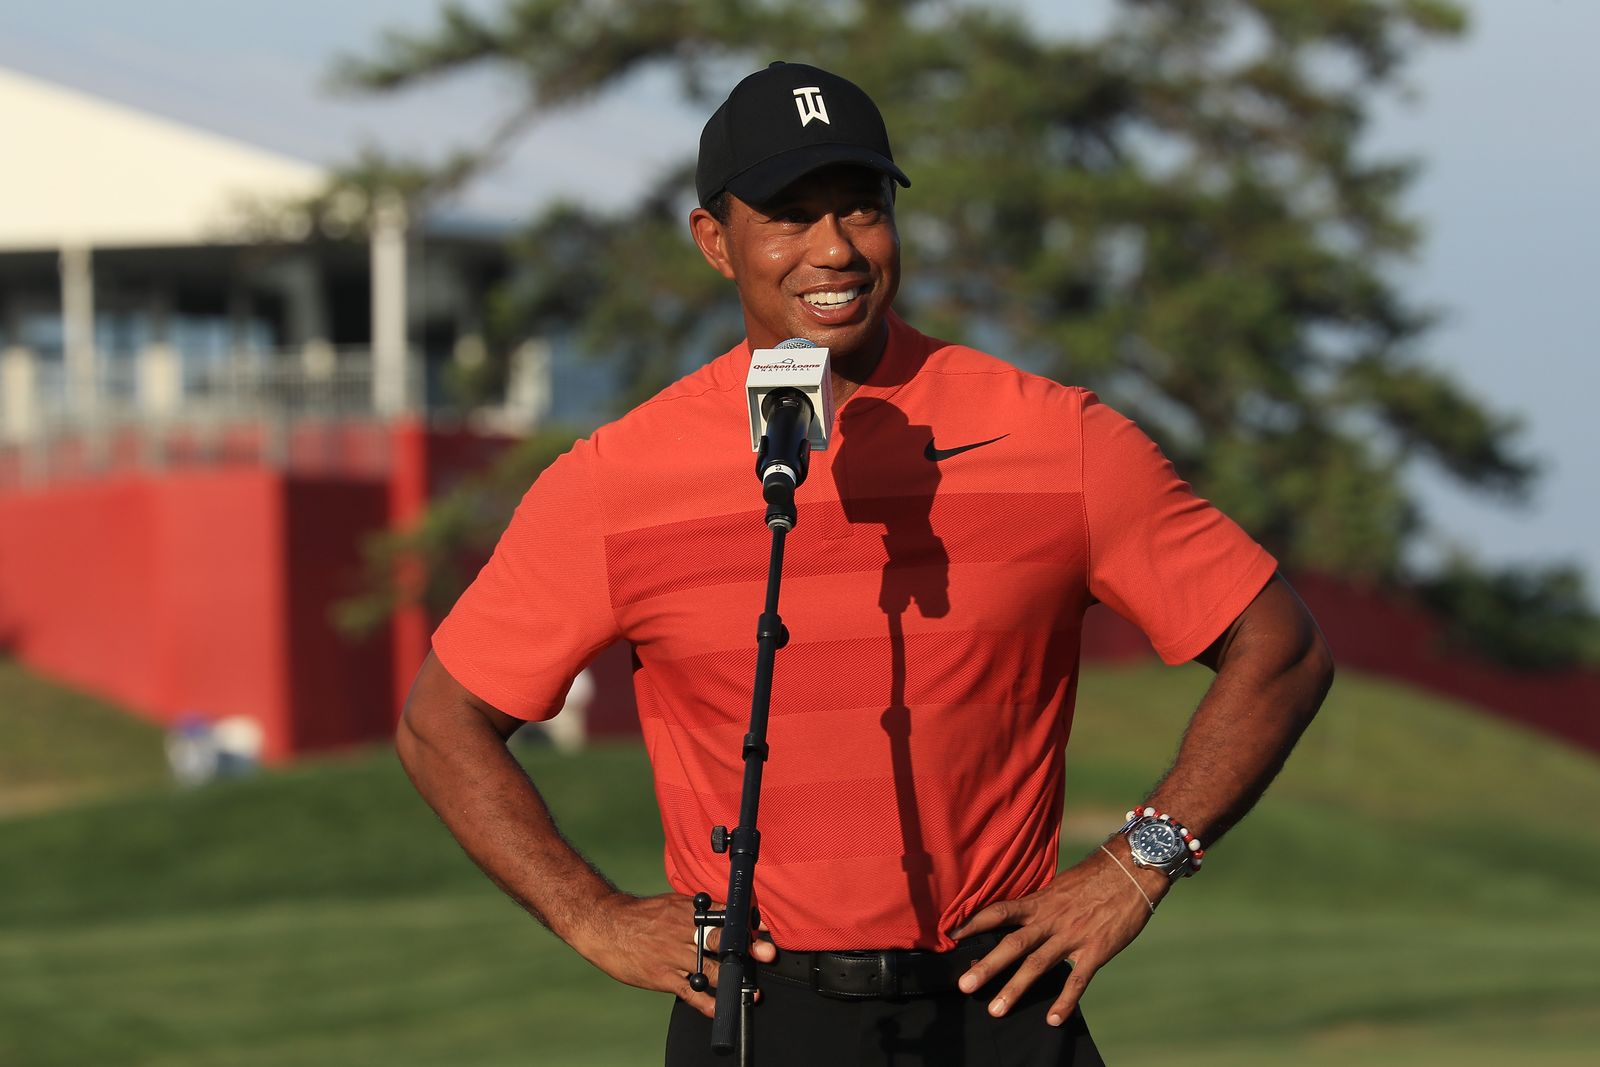 Top golf player Tiger Woods giving a speech. | Photo: Getty Images